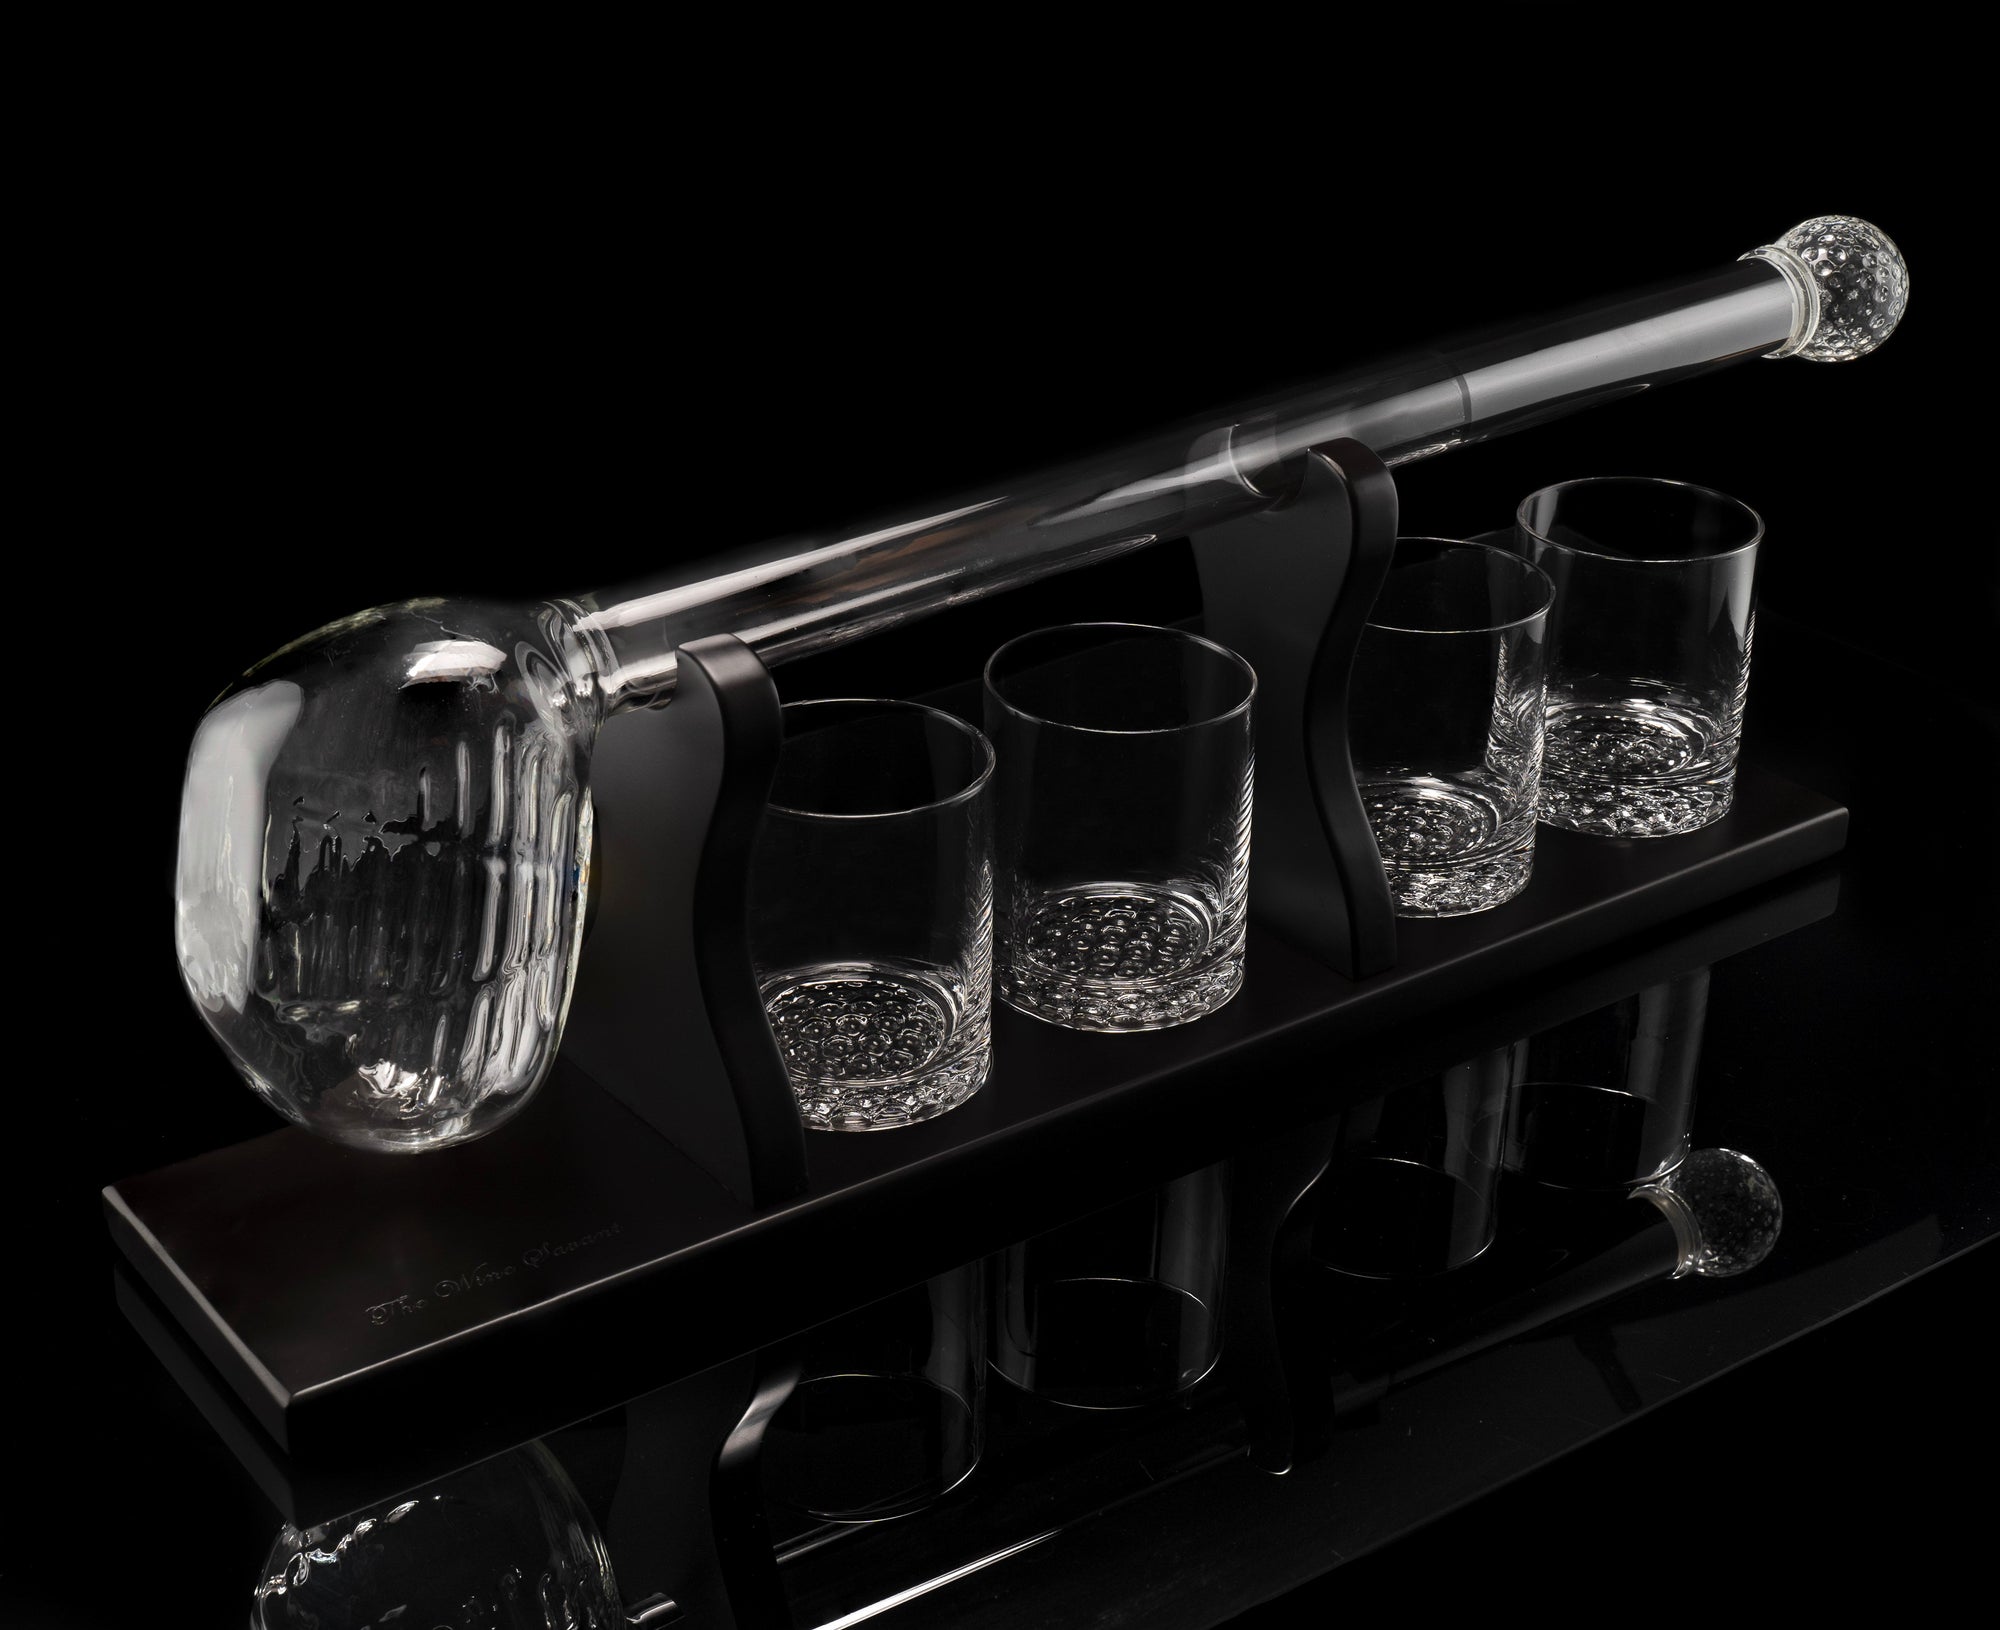 Galactic Spirits: The Blaster Decanter Set - Groovy Guy Gifts